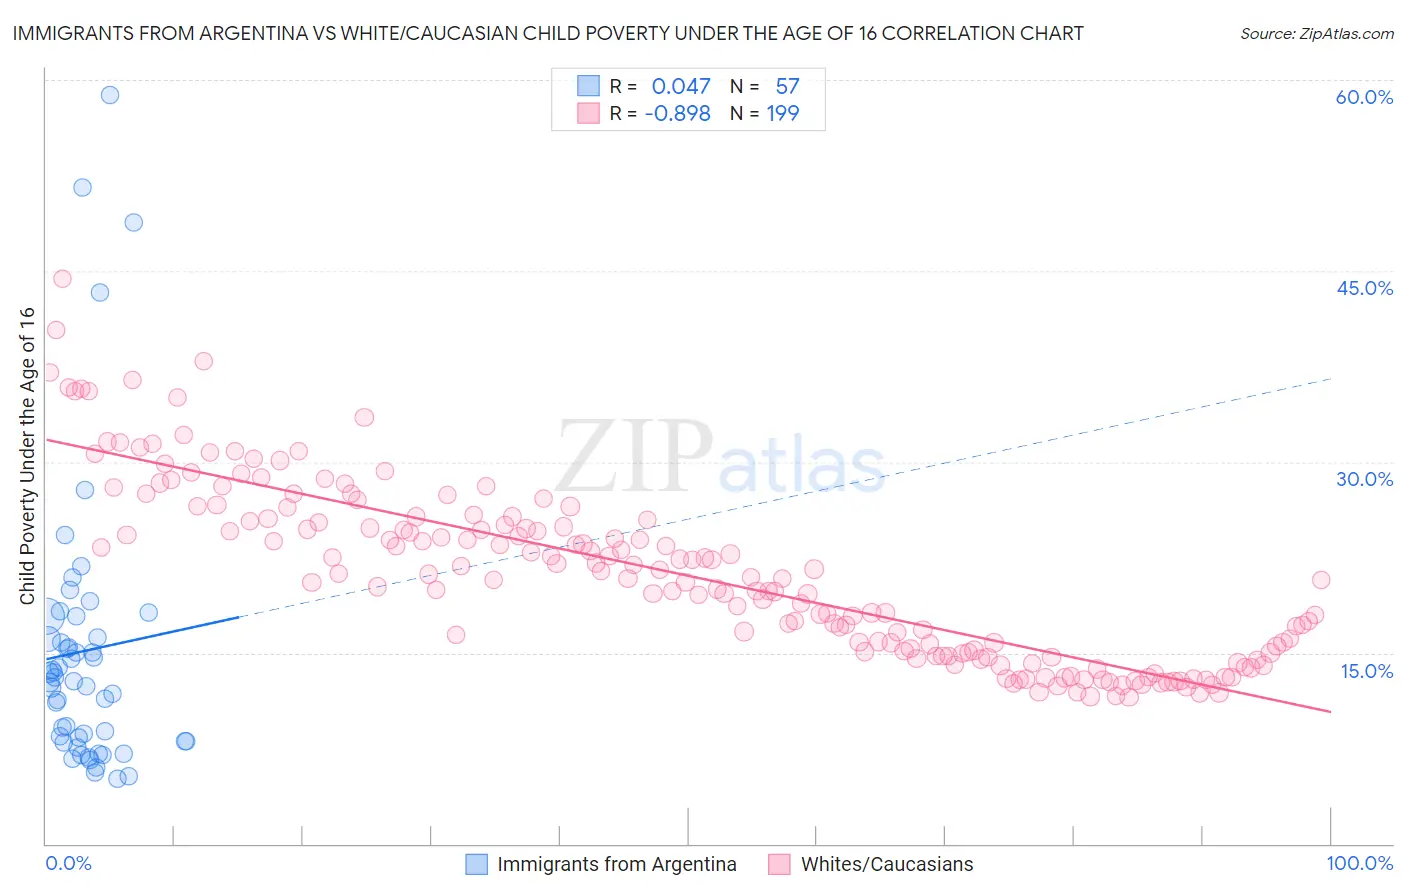 Immigrants from Argentina vs White/Caucasian Child Poverty Under the Age of 16